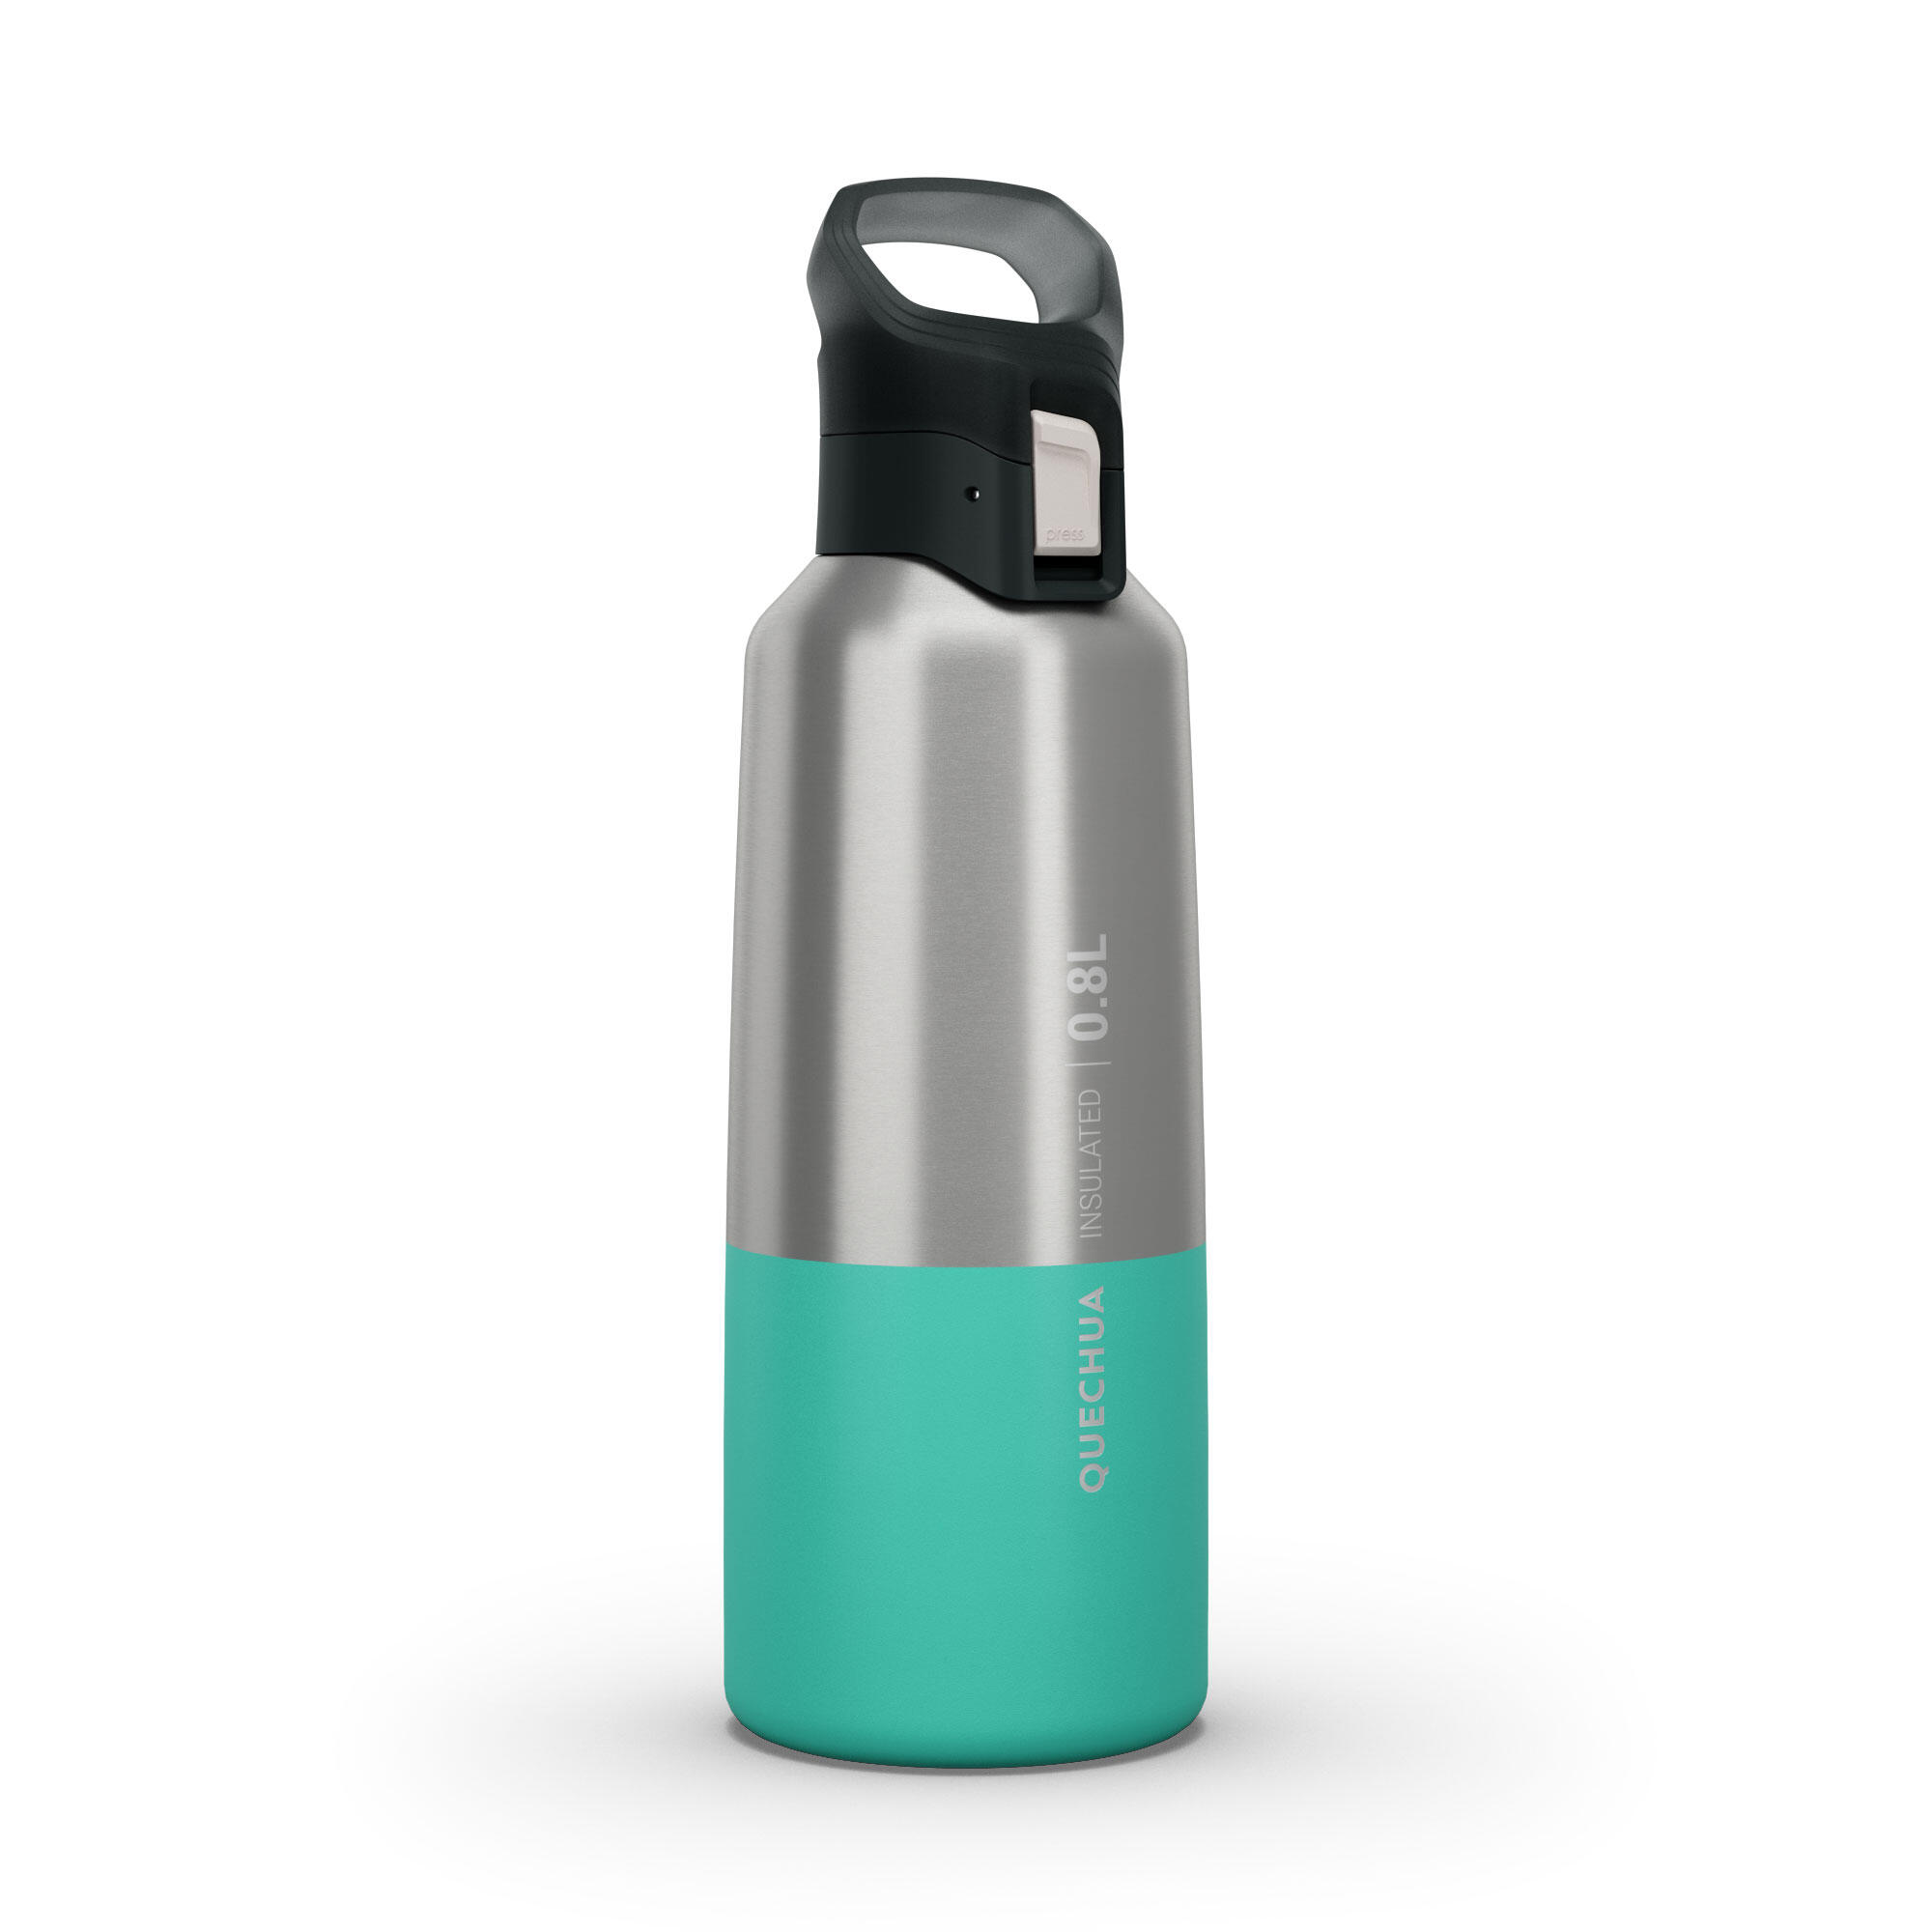 QUECHUA 0.8 L stainless steel isothermal water bottle with quick-release cap for hiking 